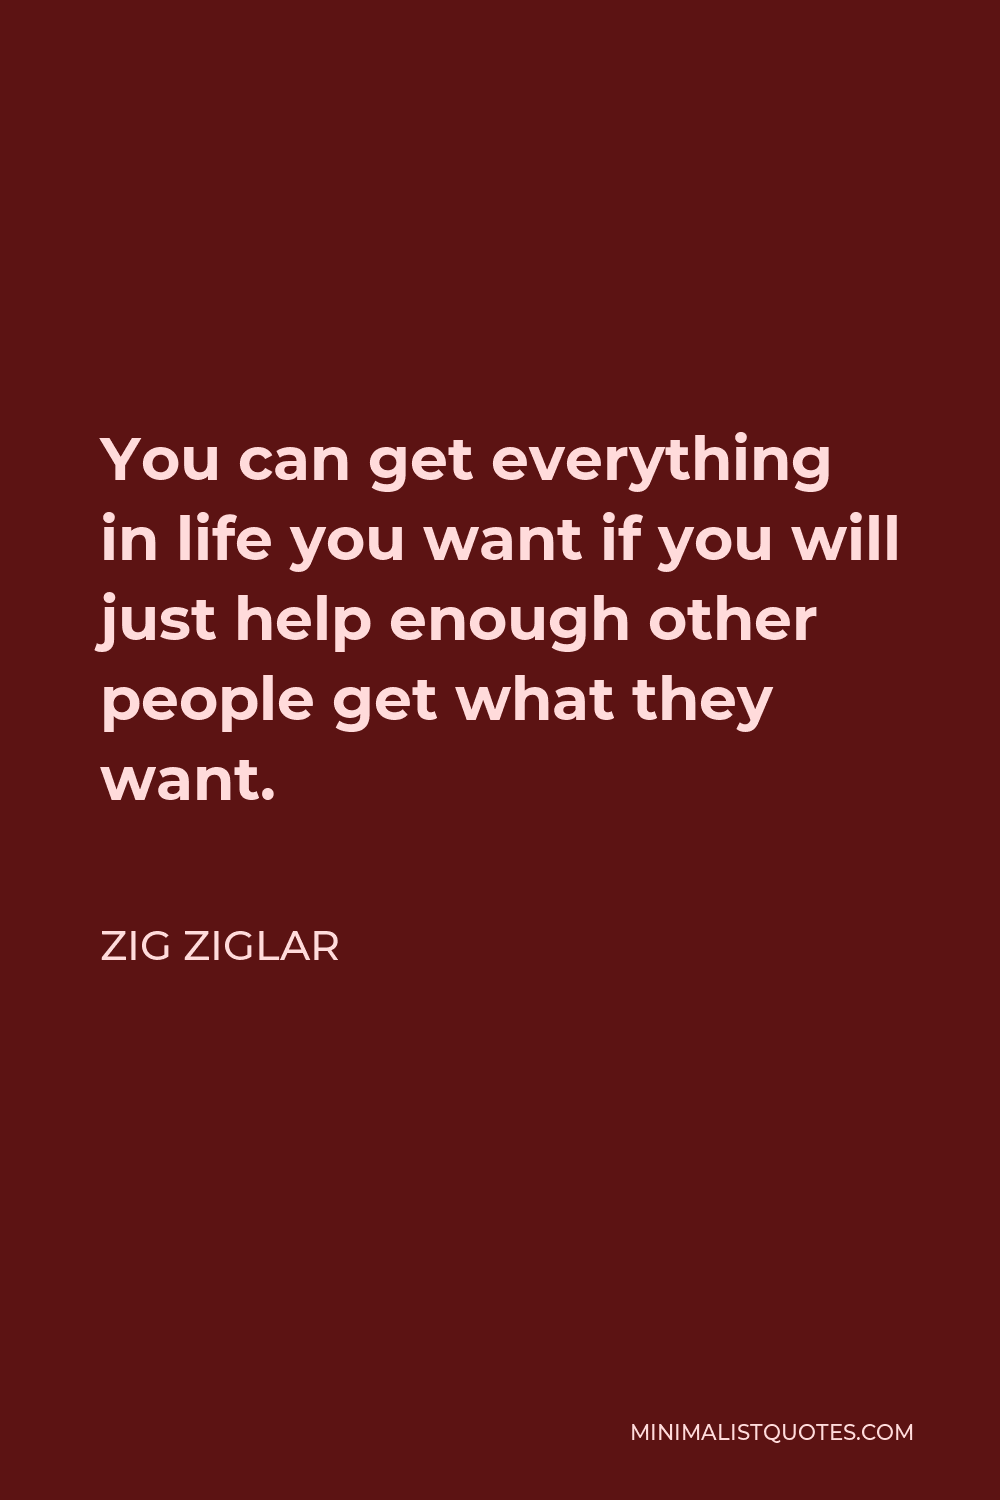 Zig Ziglar Quote - You can get everything in life you want if you will just help enough other people get what they want.